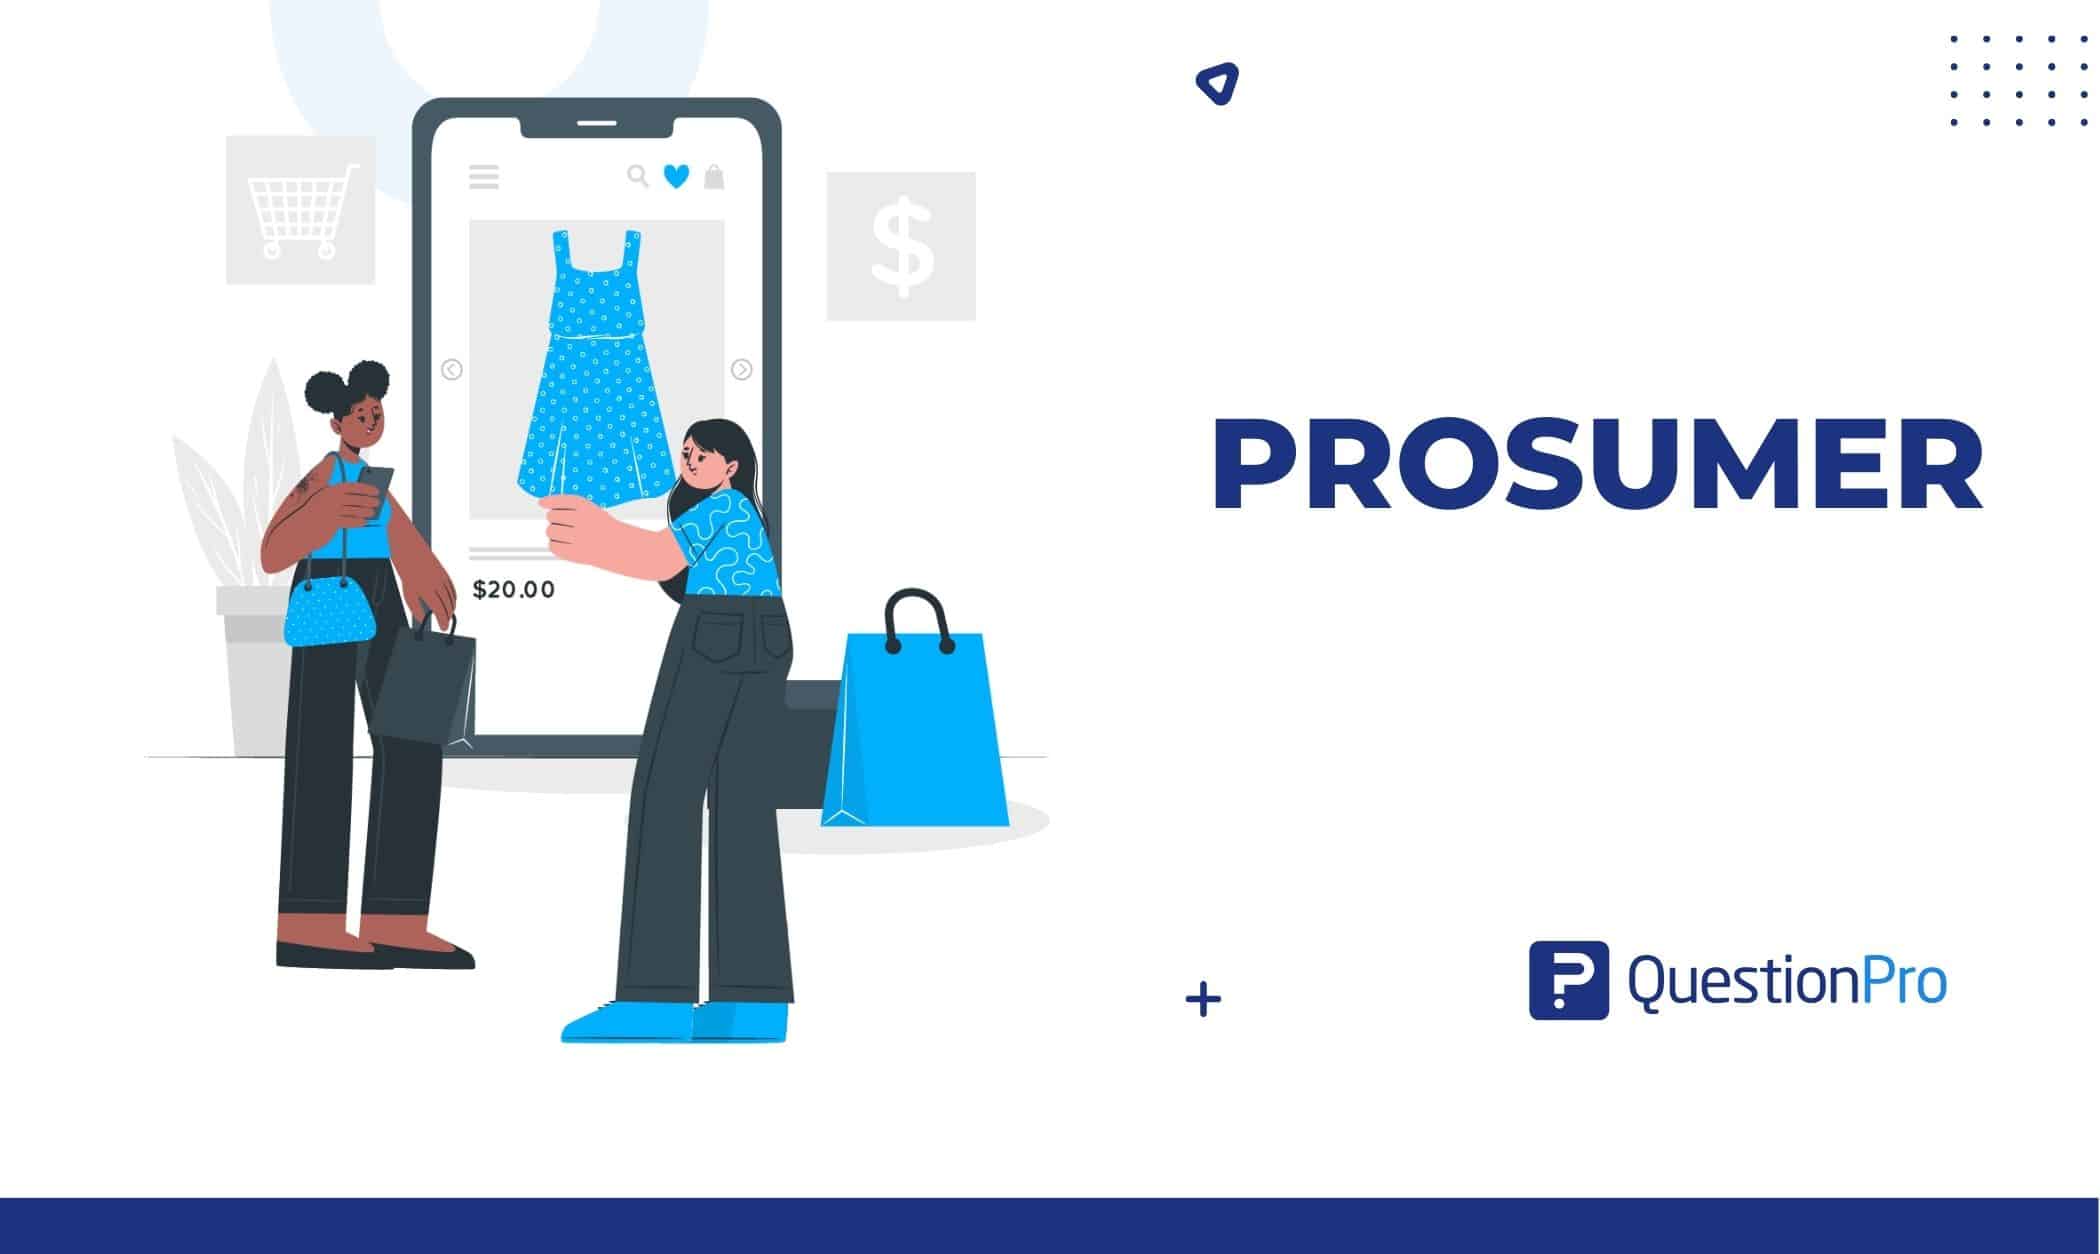 A prosumer integrates into the brand through numerous dynamics. Since prosumers are the closest to customers, having one is a good idea.